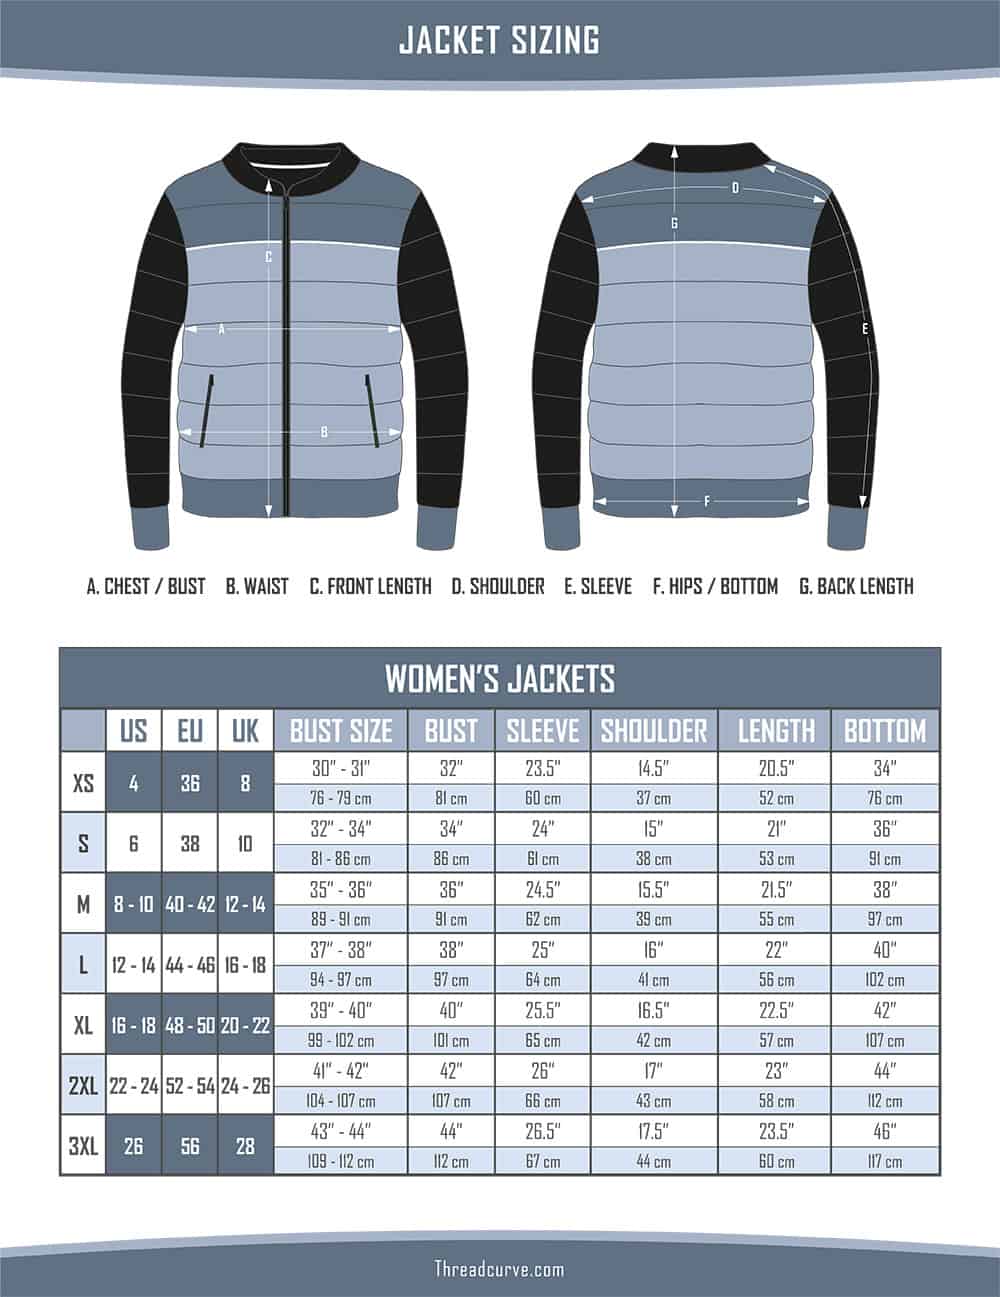 This is the chart for Women's Jackets Sizes.